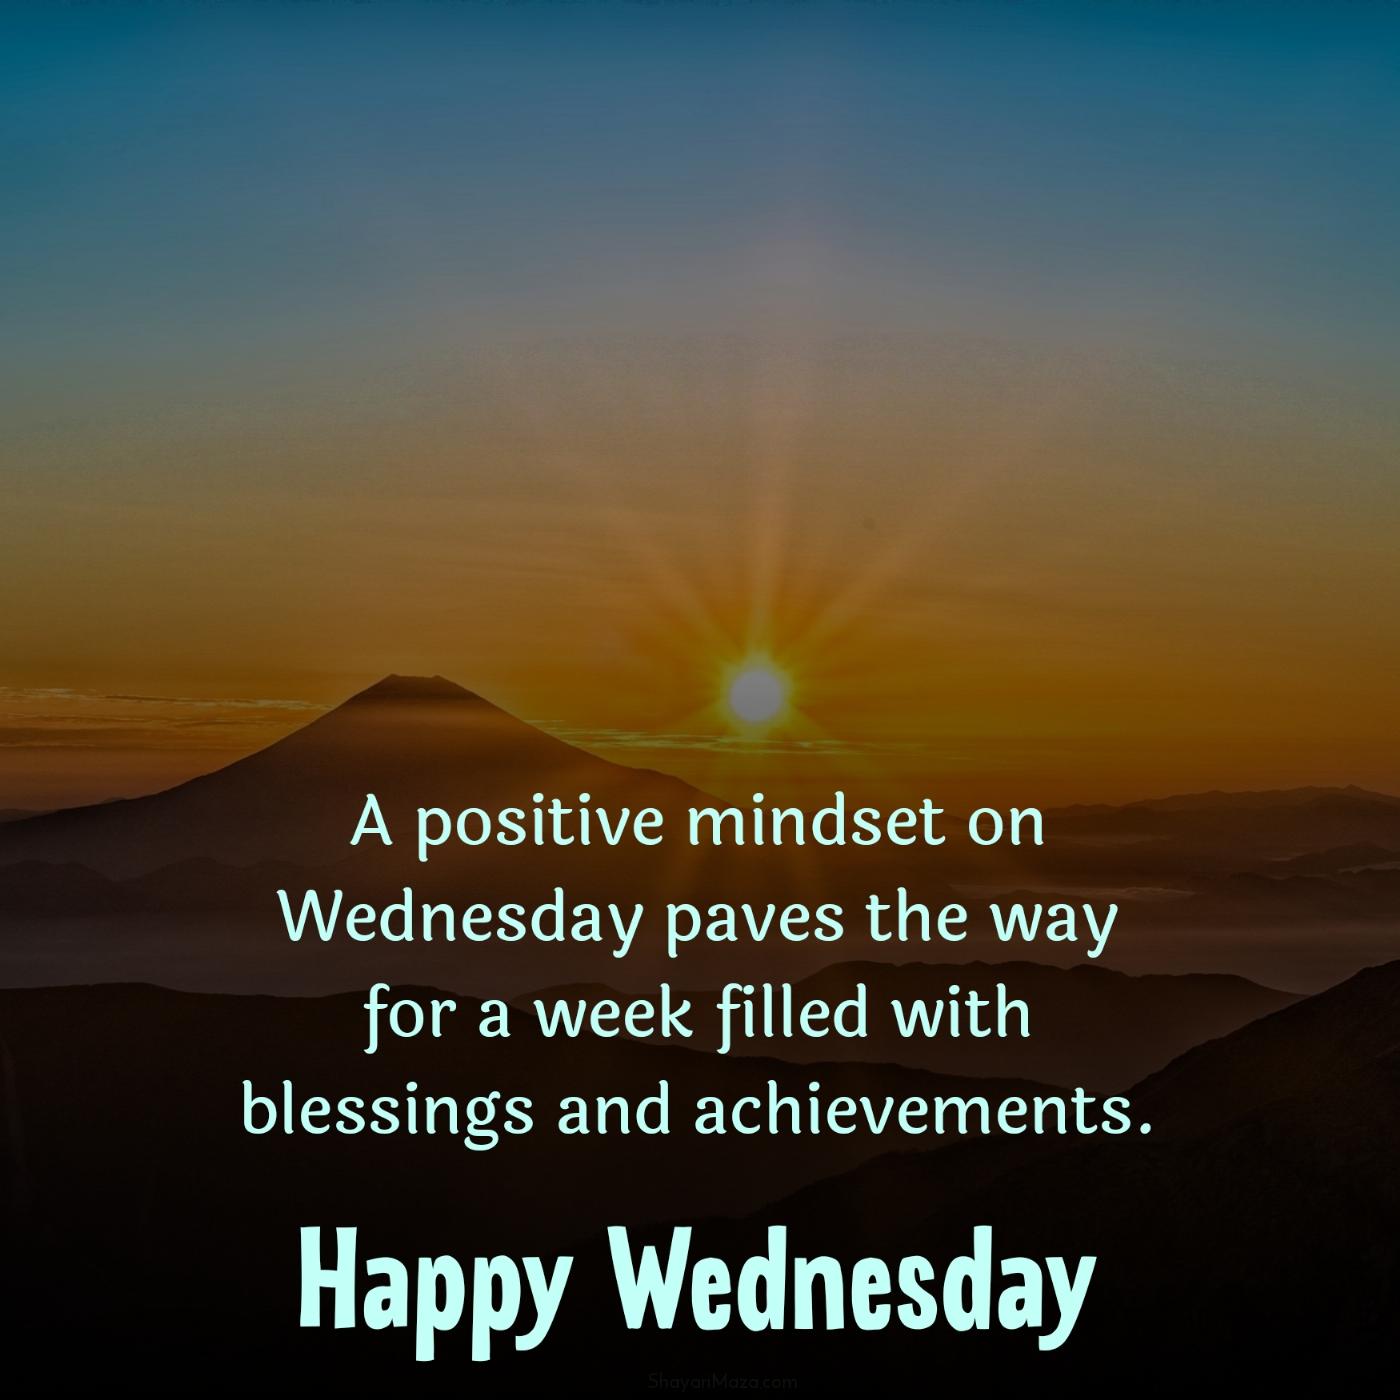 A positive mindset on Wednesday paves the way for a week